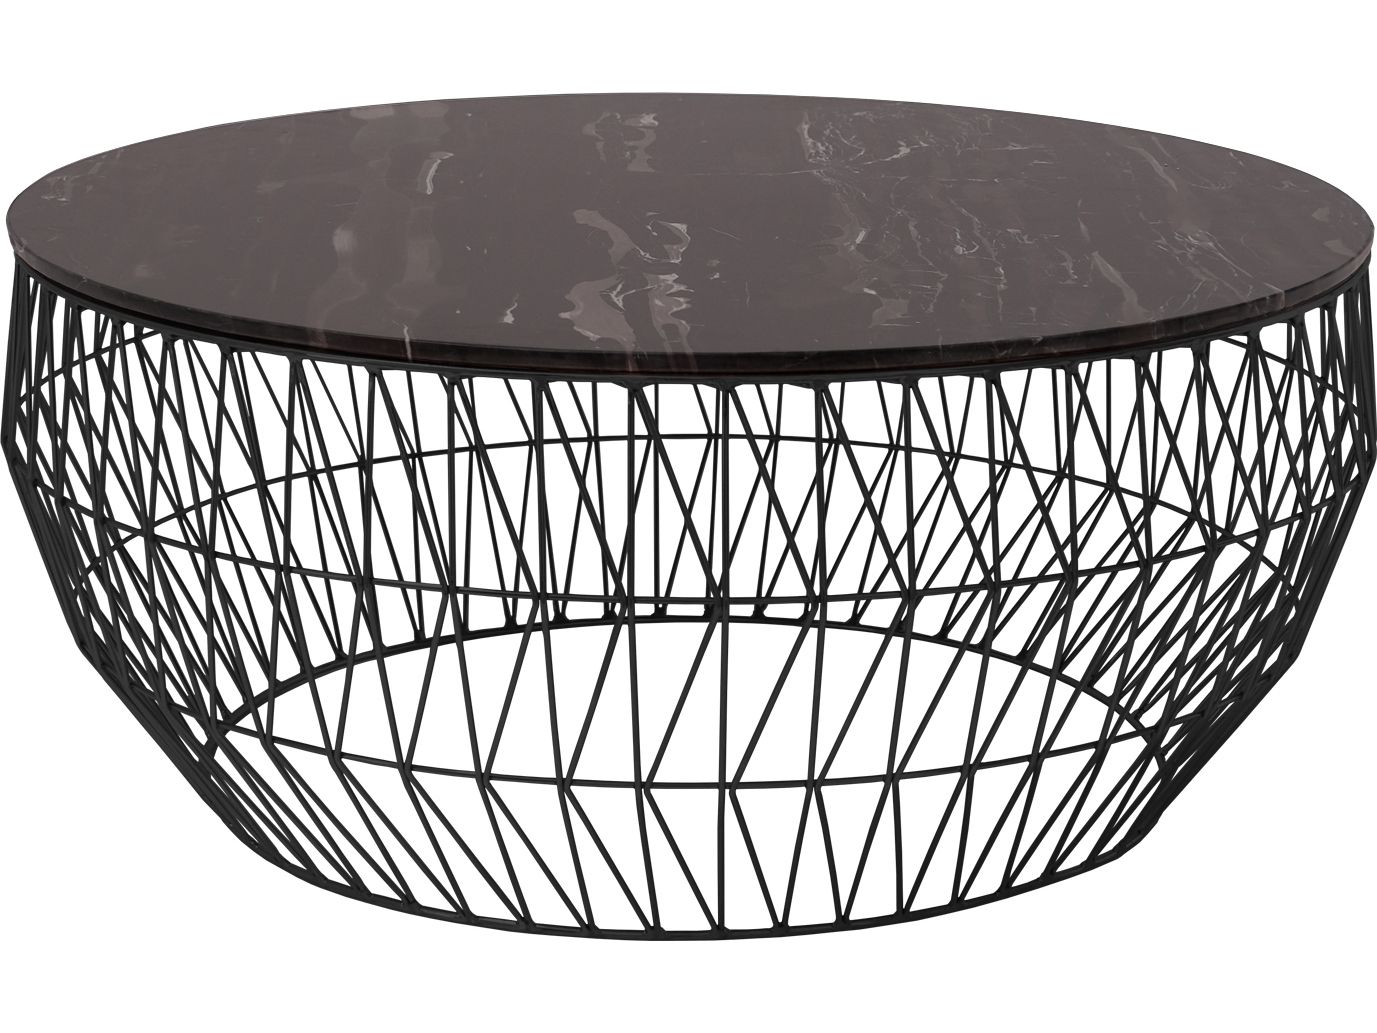 Bend Goods Outdoor Black 36'' Wide Round Coffee Table | 36coffeetableblk Intended For Round Steel Patio Coffee Tables (Gallery 12 of 20)